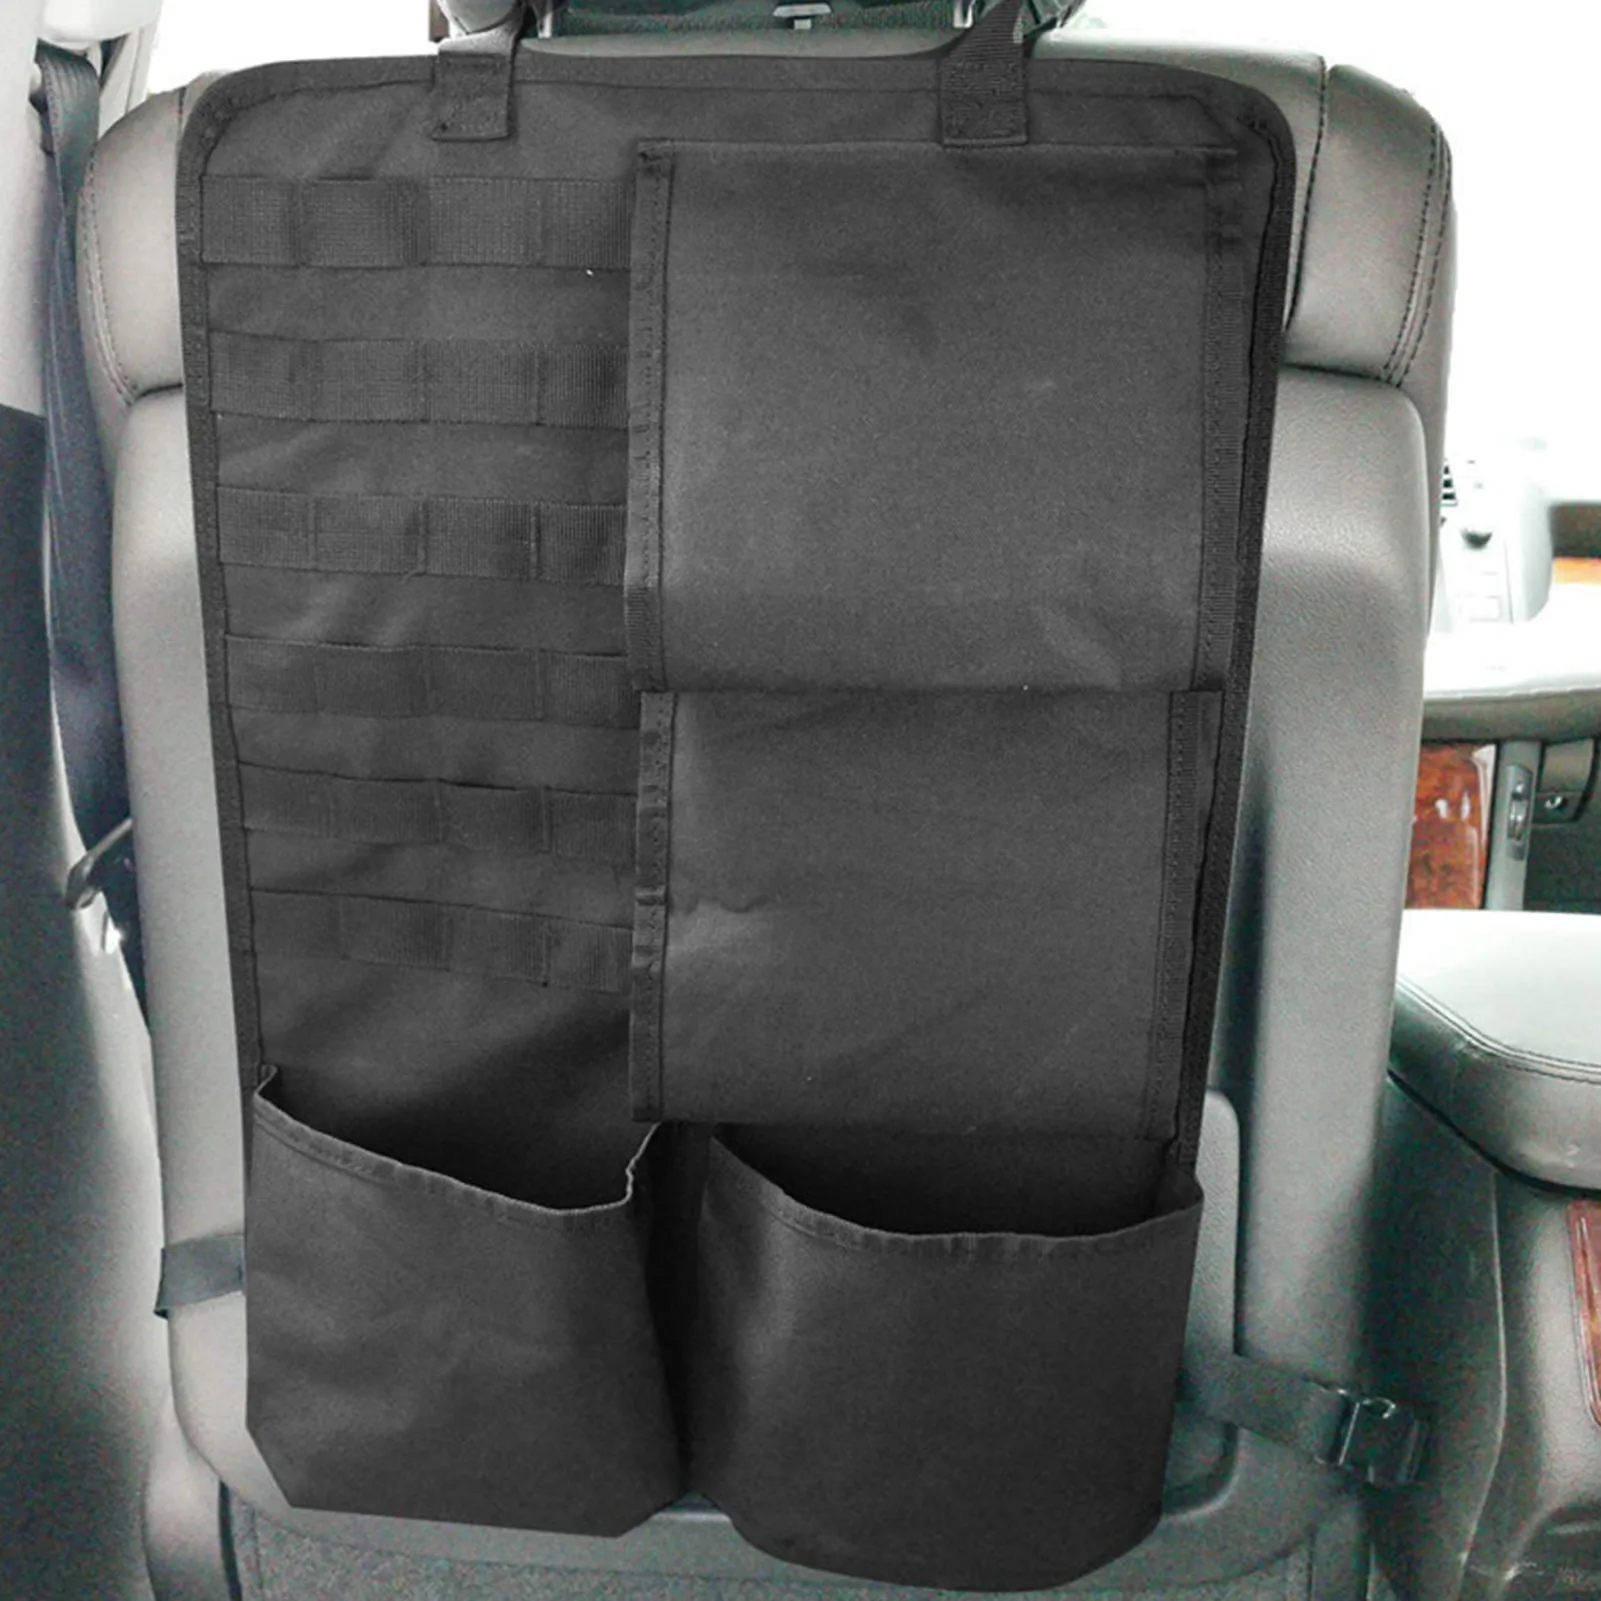 

Car Backseat Organizer 38x15x5cm Auto Storage Pockets Cover Car Seat Back Protectors Car Seat Back Organizers for Kids Travel